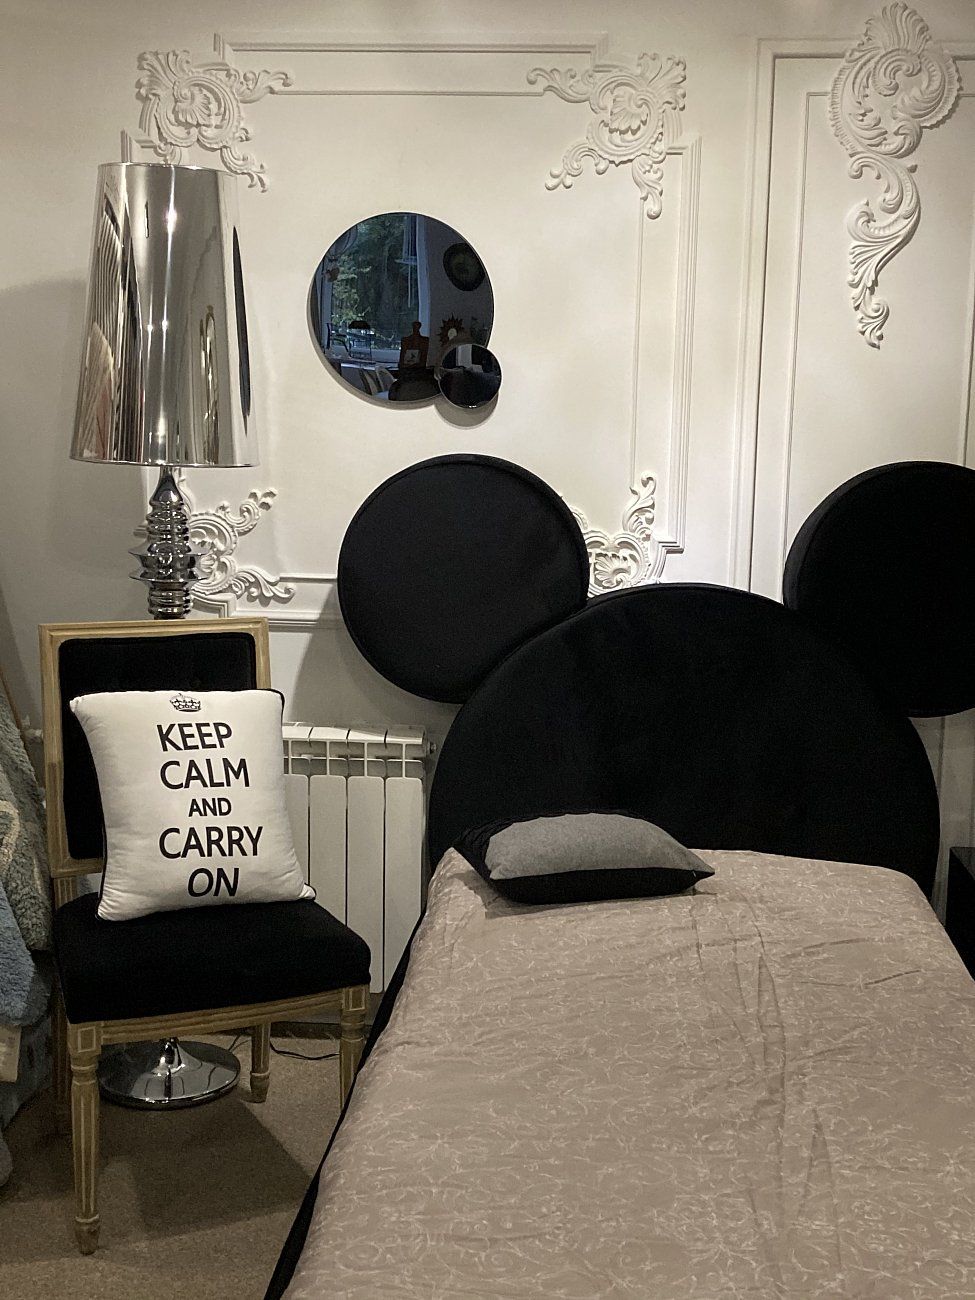 Single bed for children 120x200 cm black Mickey Mouse